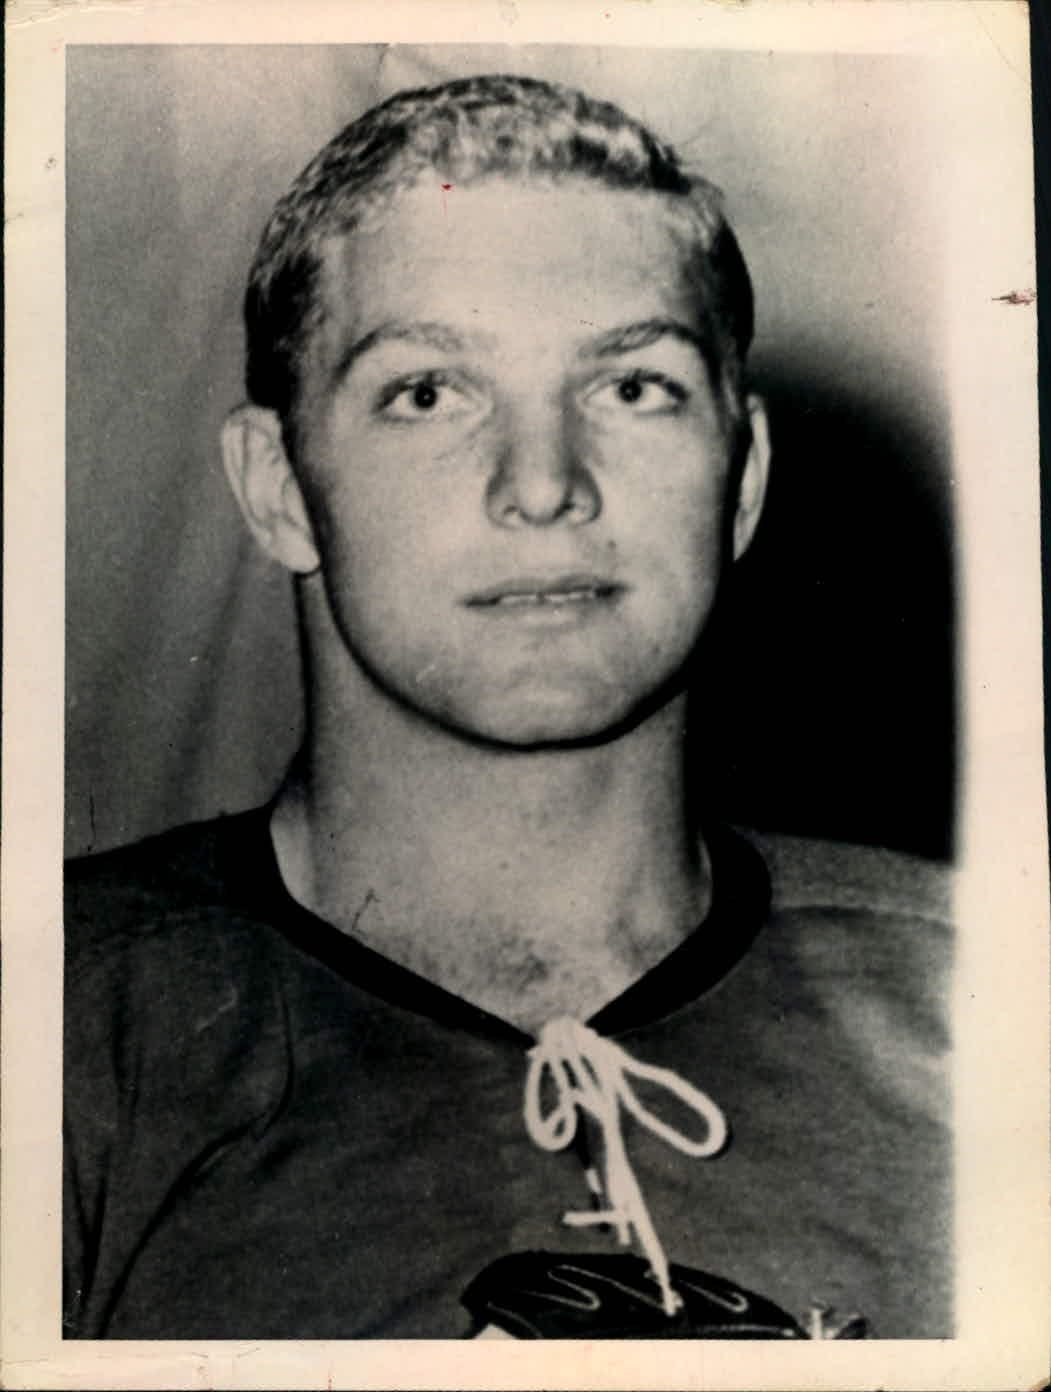 Bobby Hull The Golden Jet, Original laser wire photos from my collection